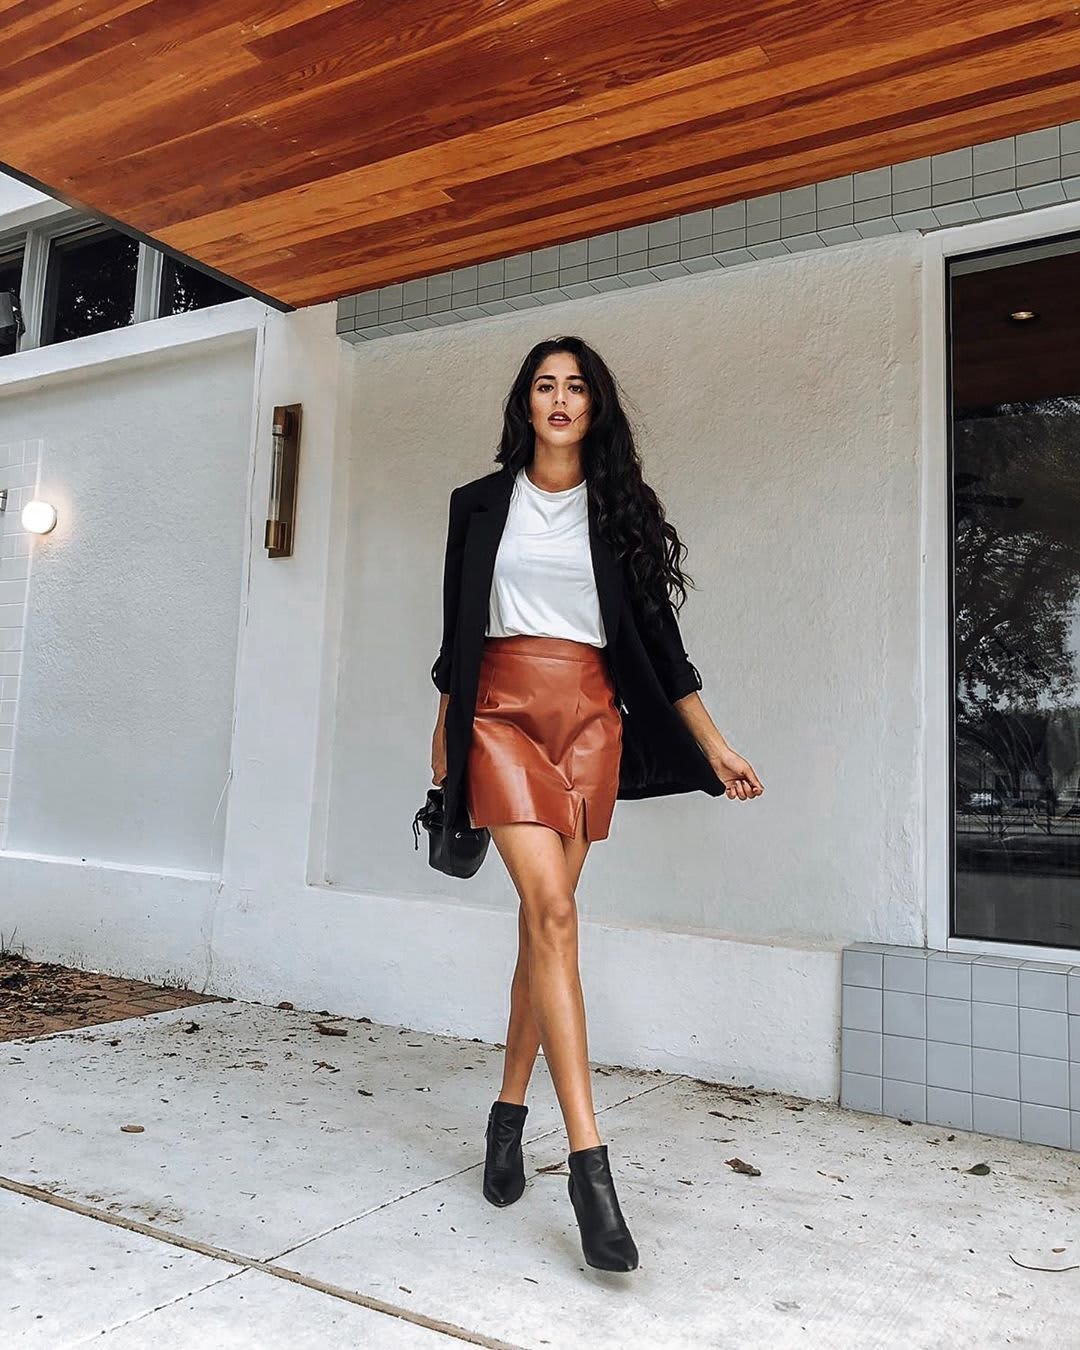 Fotoelektrisch vuurwerk uitzondering Leather Skirt Outfit Ideas for Fall and Winter - Lulus.com Fashion Blog